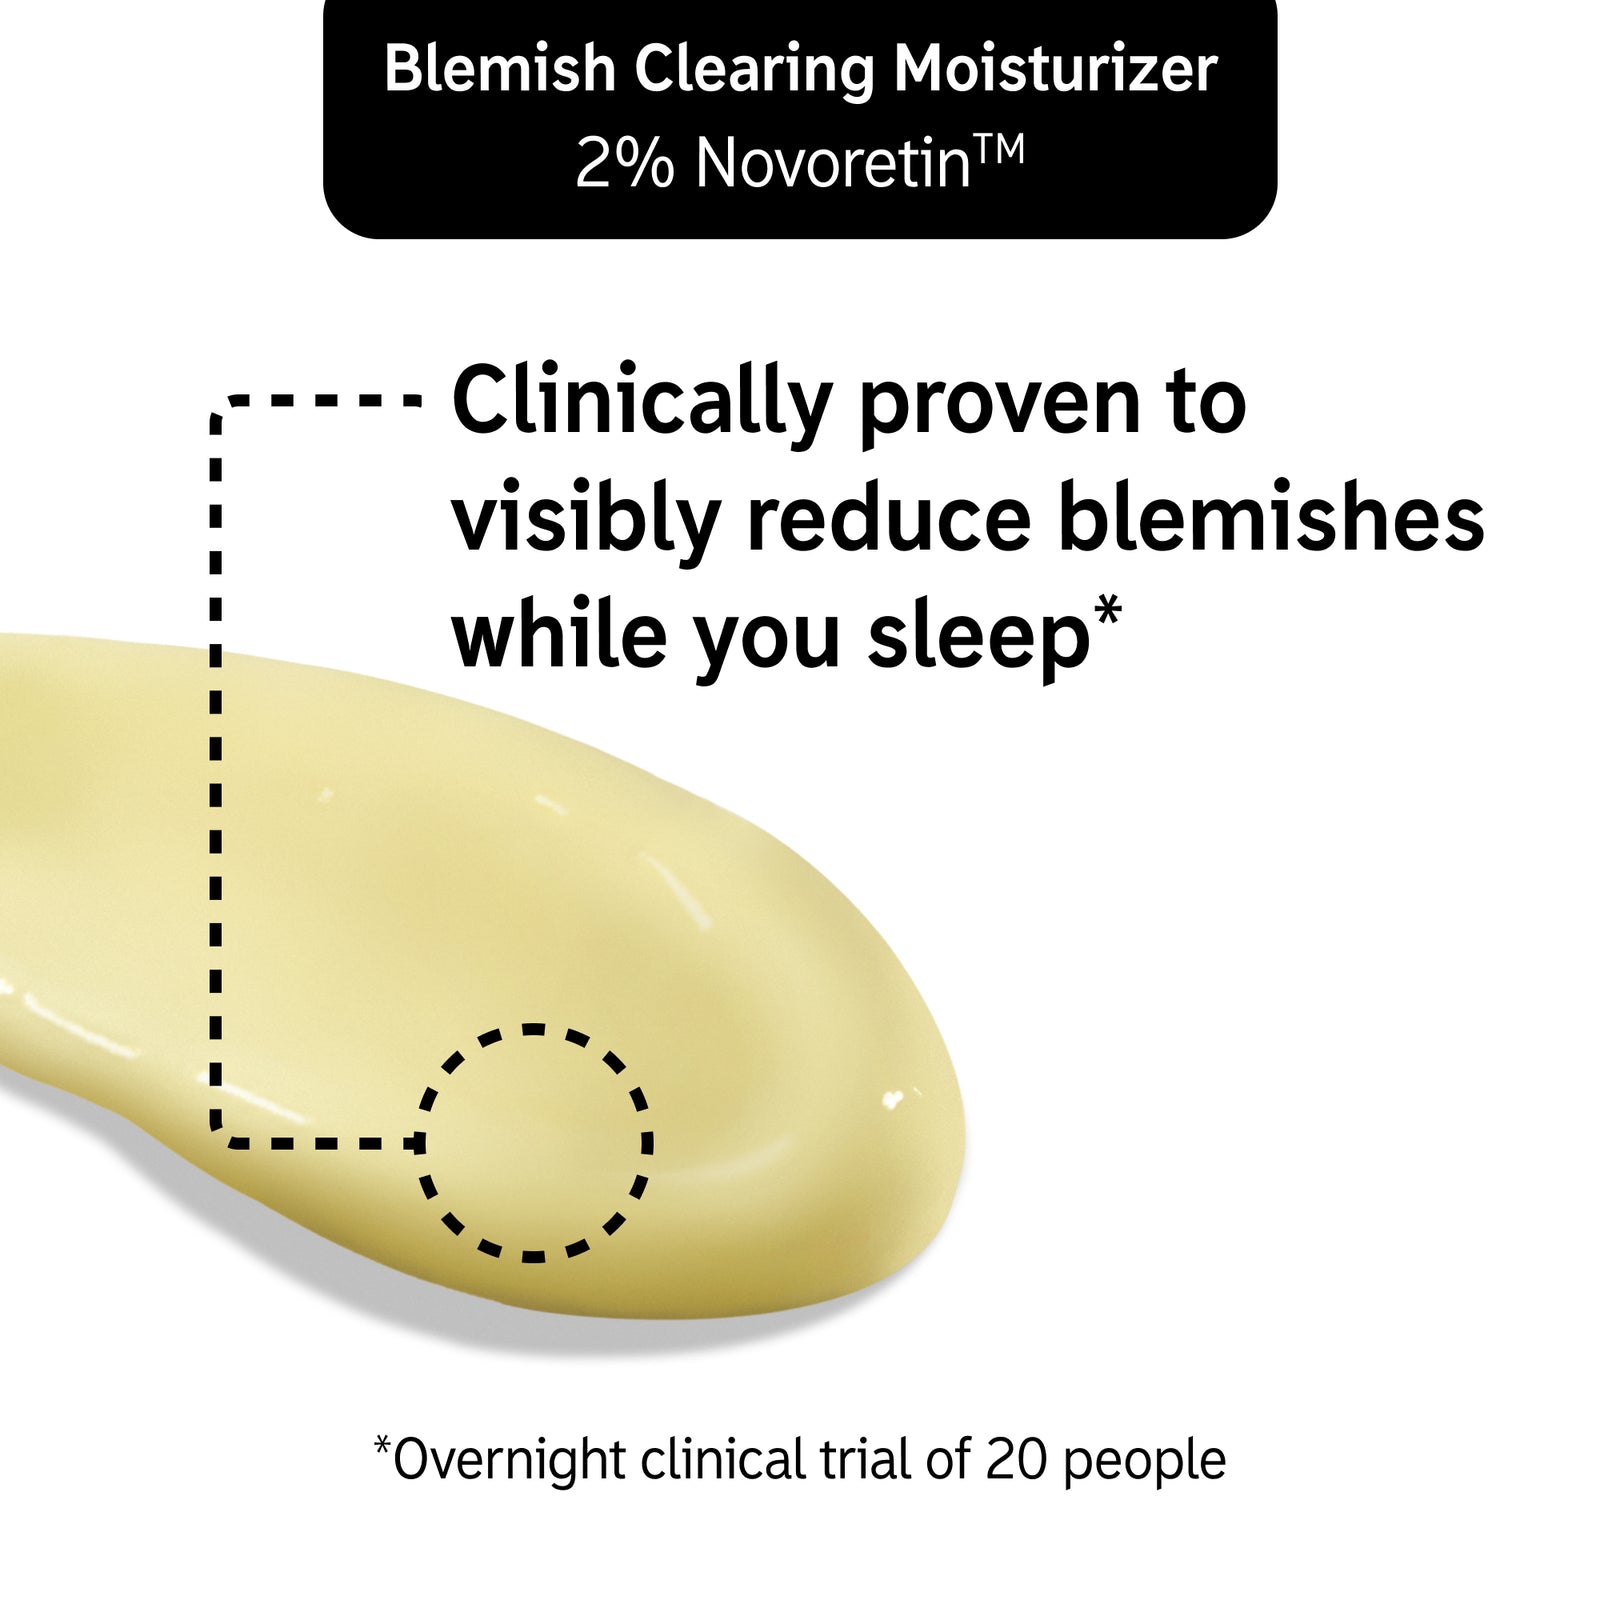 key claim from clinical trial of 20 people using Blemish Cleansing Moisturizer